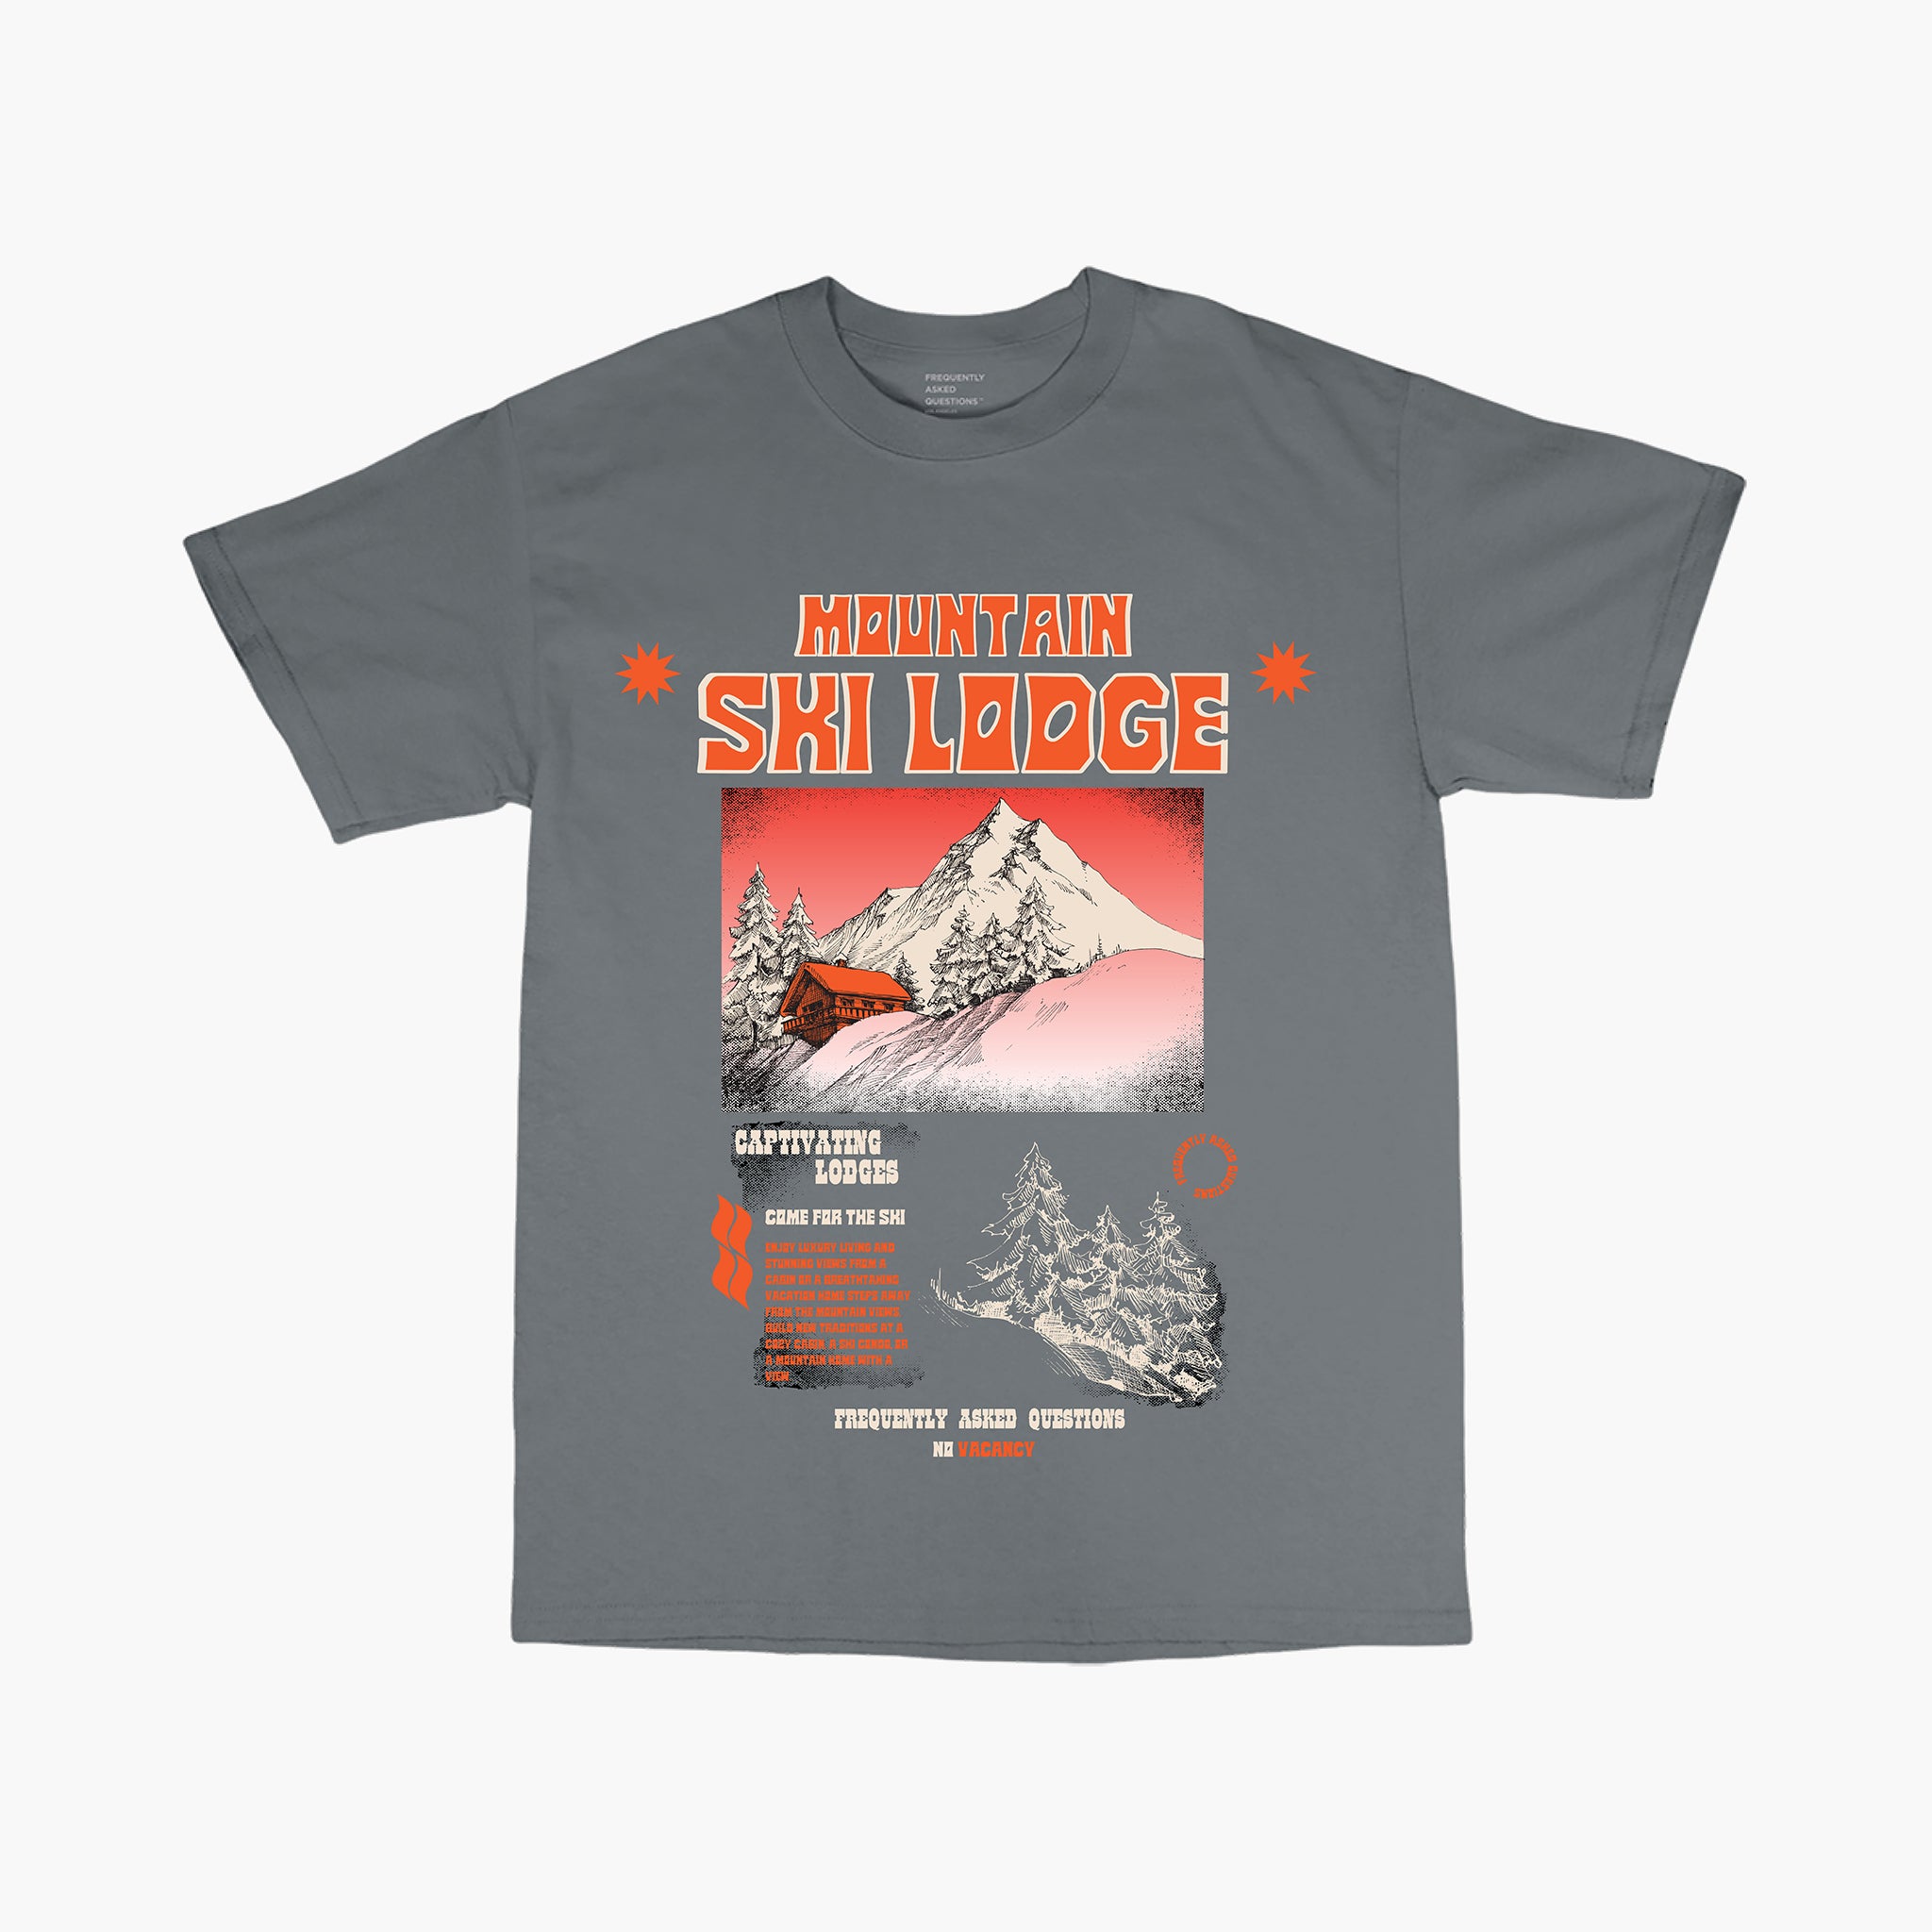 Ski Lodge T-Shirt - Frequently Asked Questions